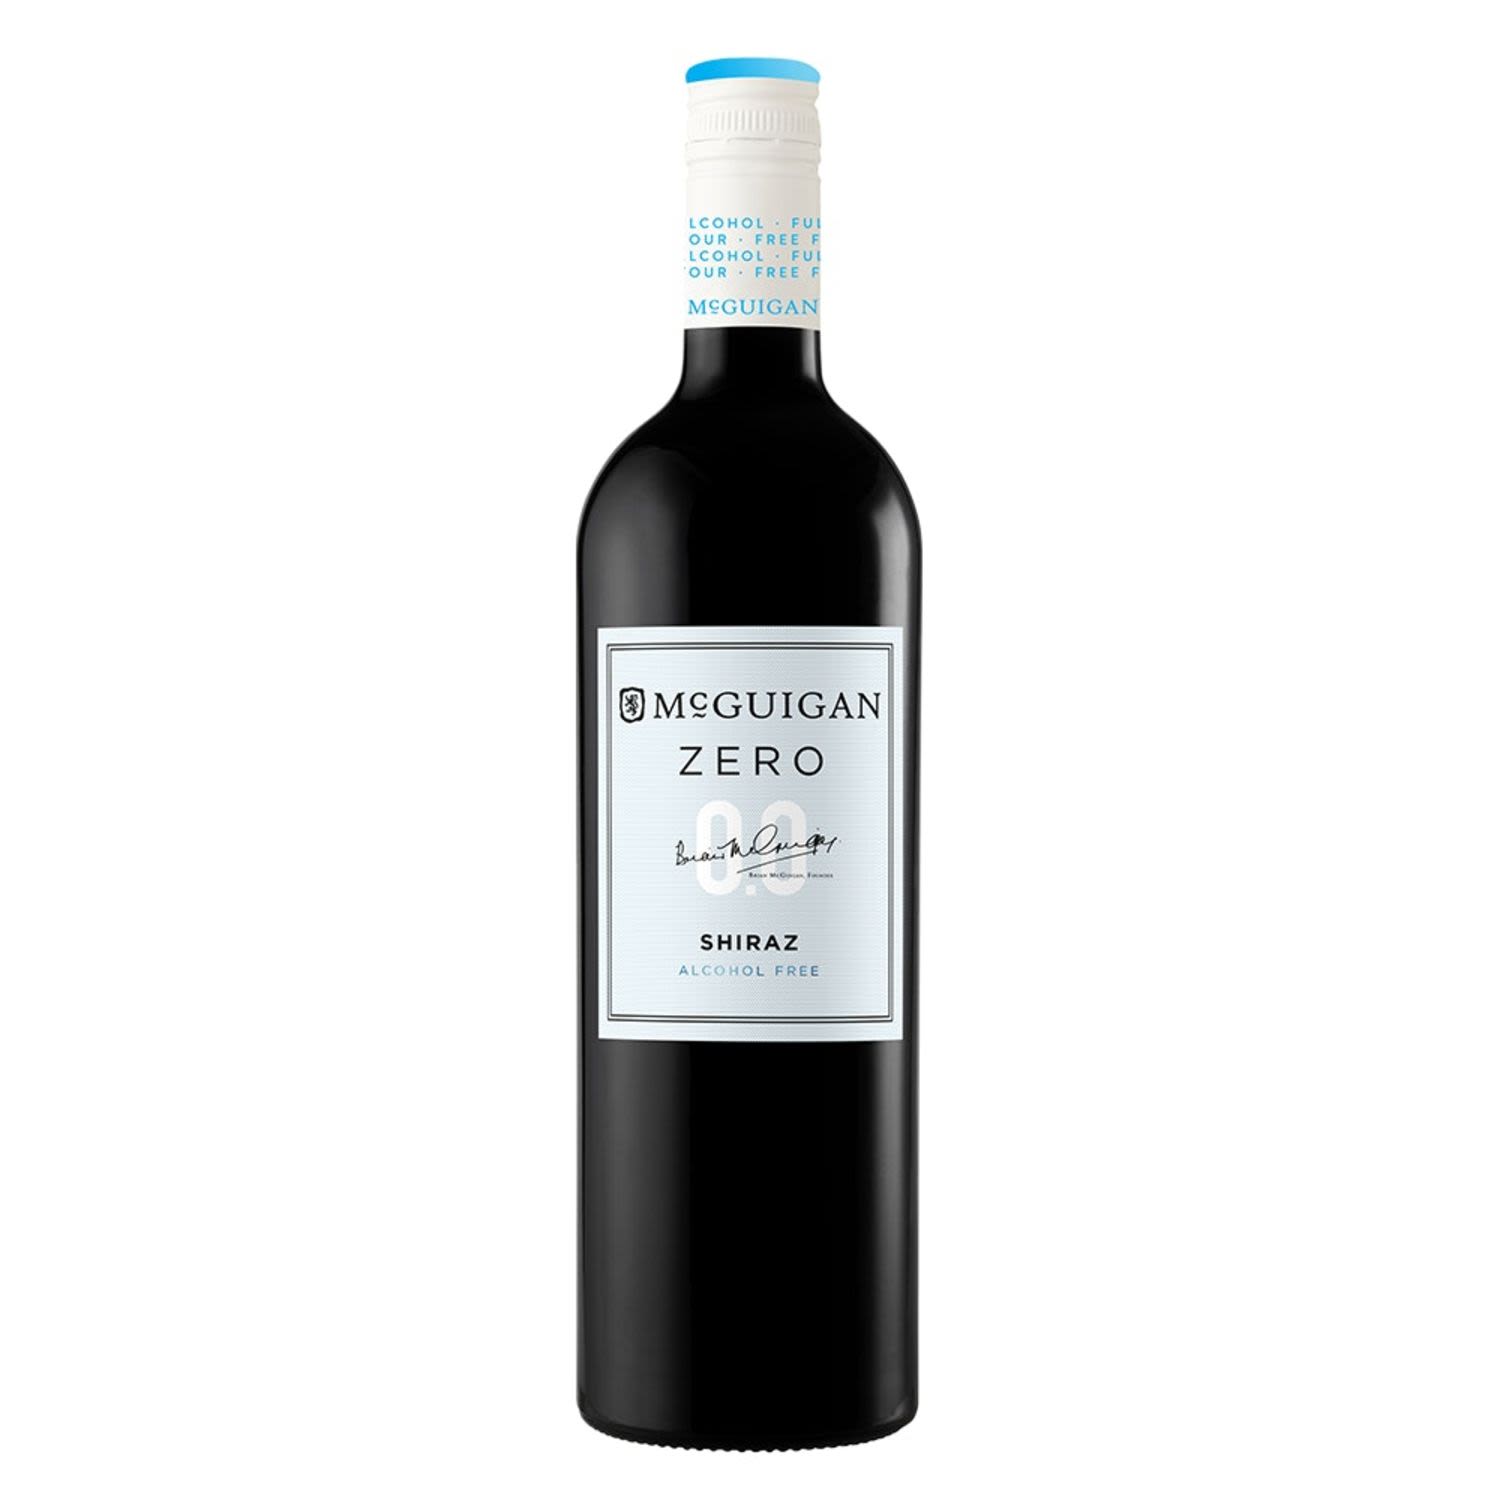 McGuigan Wines have now included these alcohol free wines into their range. Subtle spice and vanilla notes complemented by plum and forest berry aromas. The palate round and smooth showing sweet blackcurrants complimented with a balanced finish.<br /> <br />Alcohol Volume: 0.00%<br /><br />Pack Format: Bottle<br /><br />Standard Drinks: 0</br /><br />Pack Type: Bottle<br /><br />Country of Origin: Australia<br /><br />Region: South Eastern Australia<br /><br />Vintage: Vintages Vary<br />